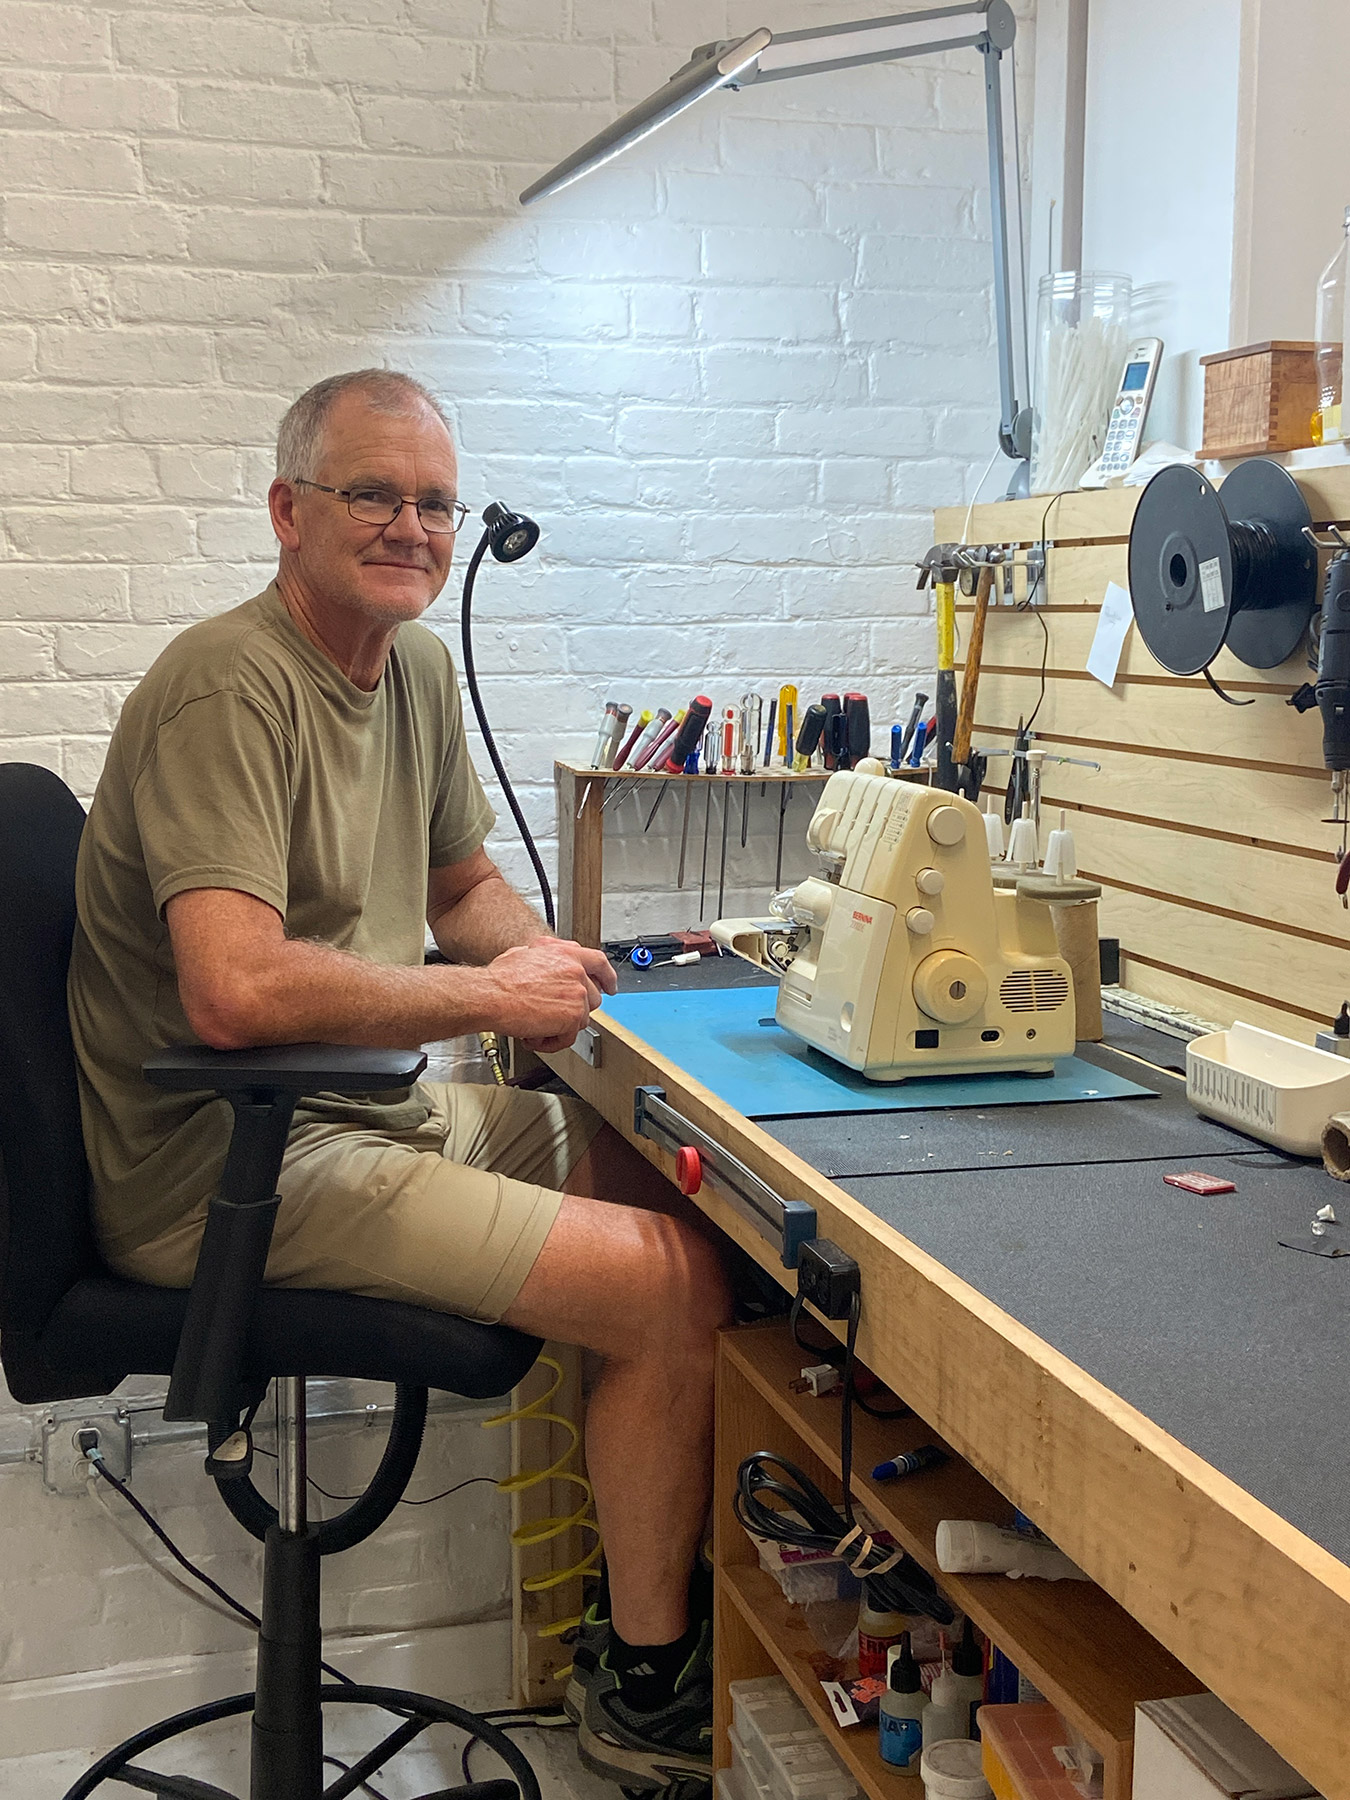 Shoreline Sewing Machine Company focuses on sales and repairs, the retailer also offers sewing classes for the beginner enthusiast to the most seasoned stitcher.